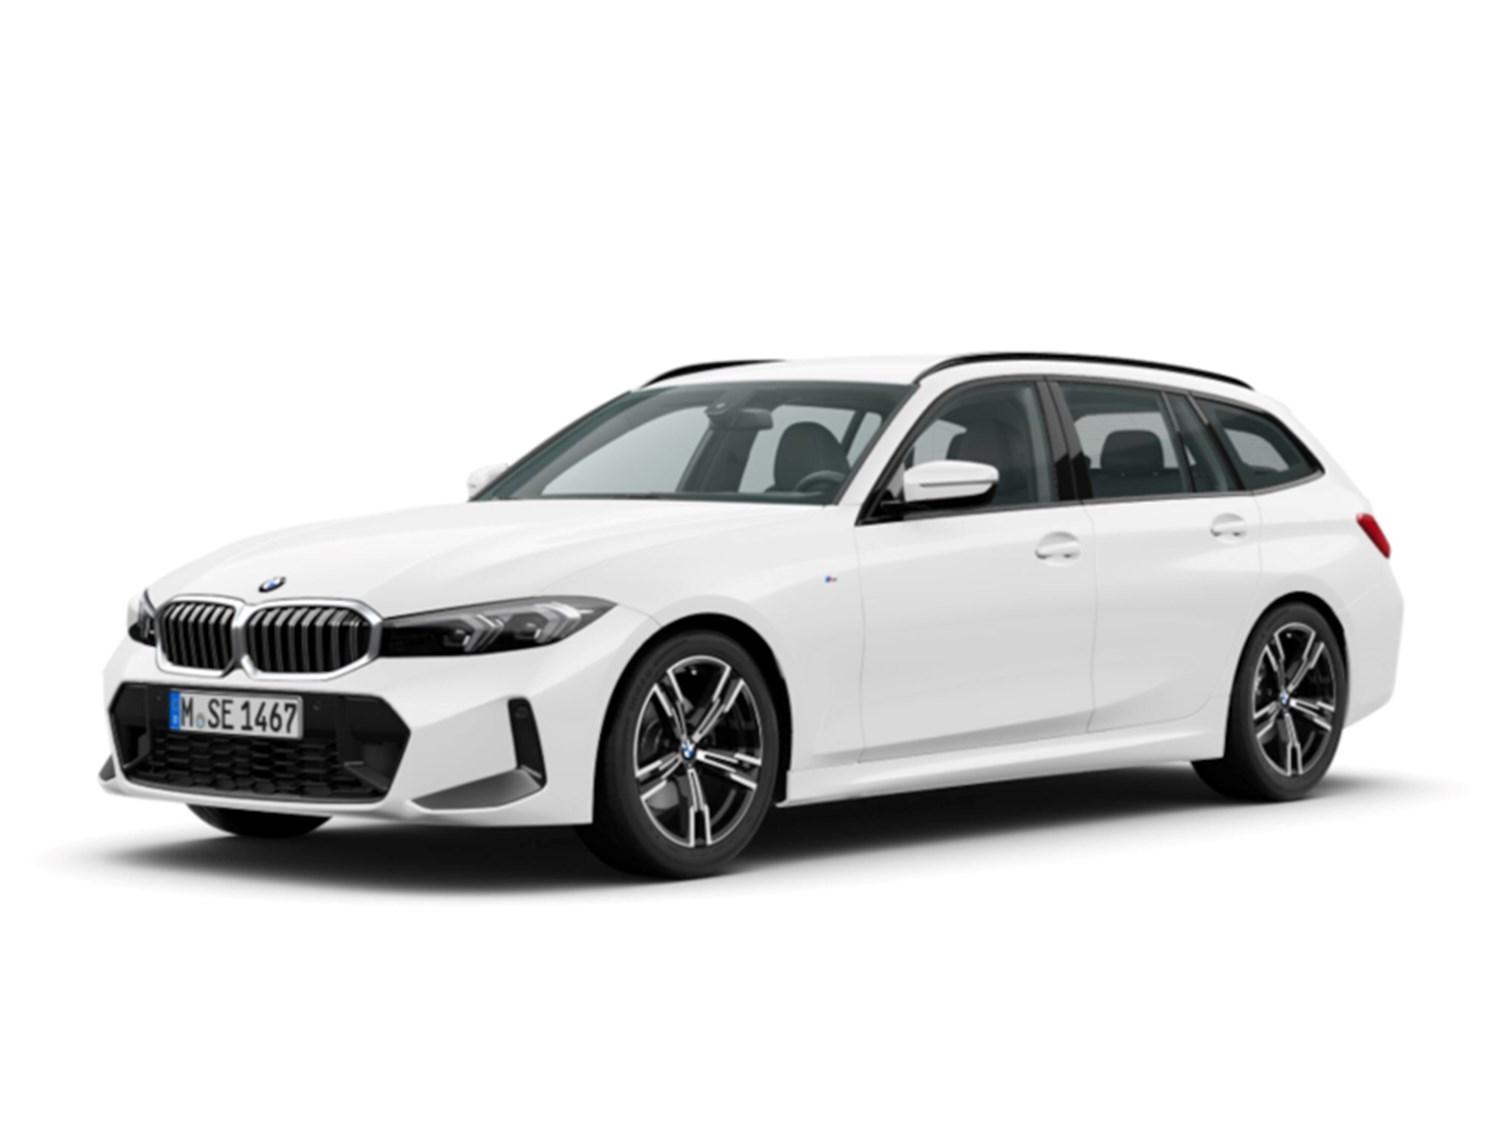 BMW 320i M Sport Touring, in White